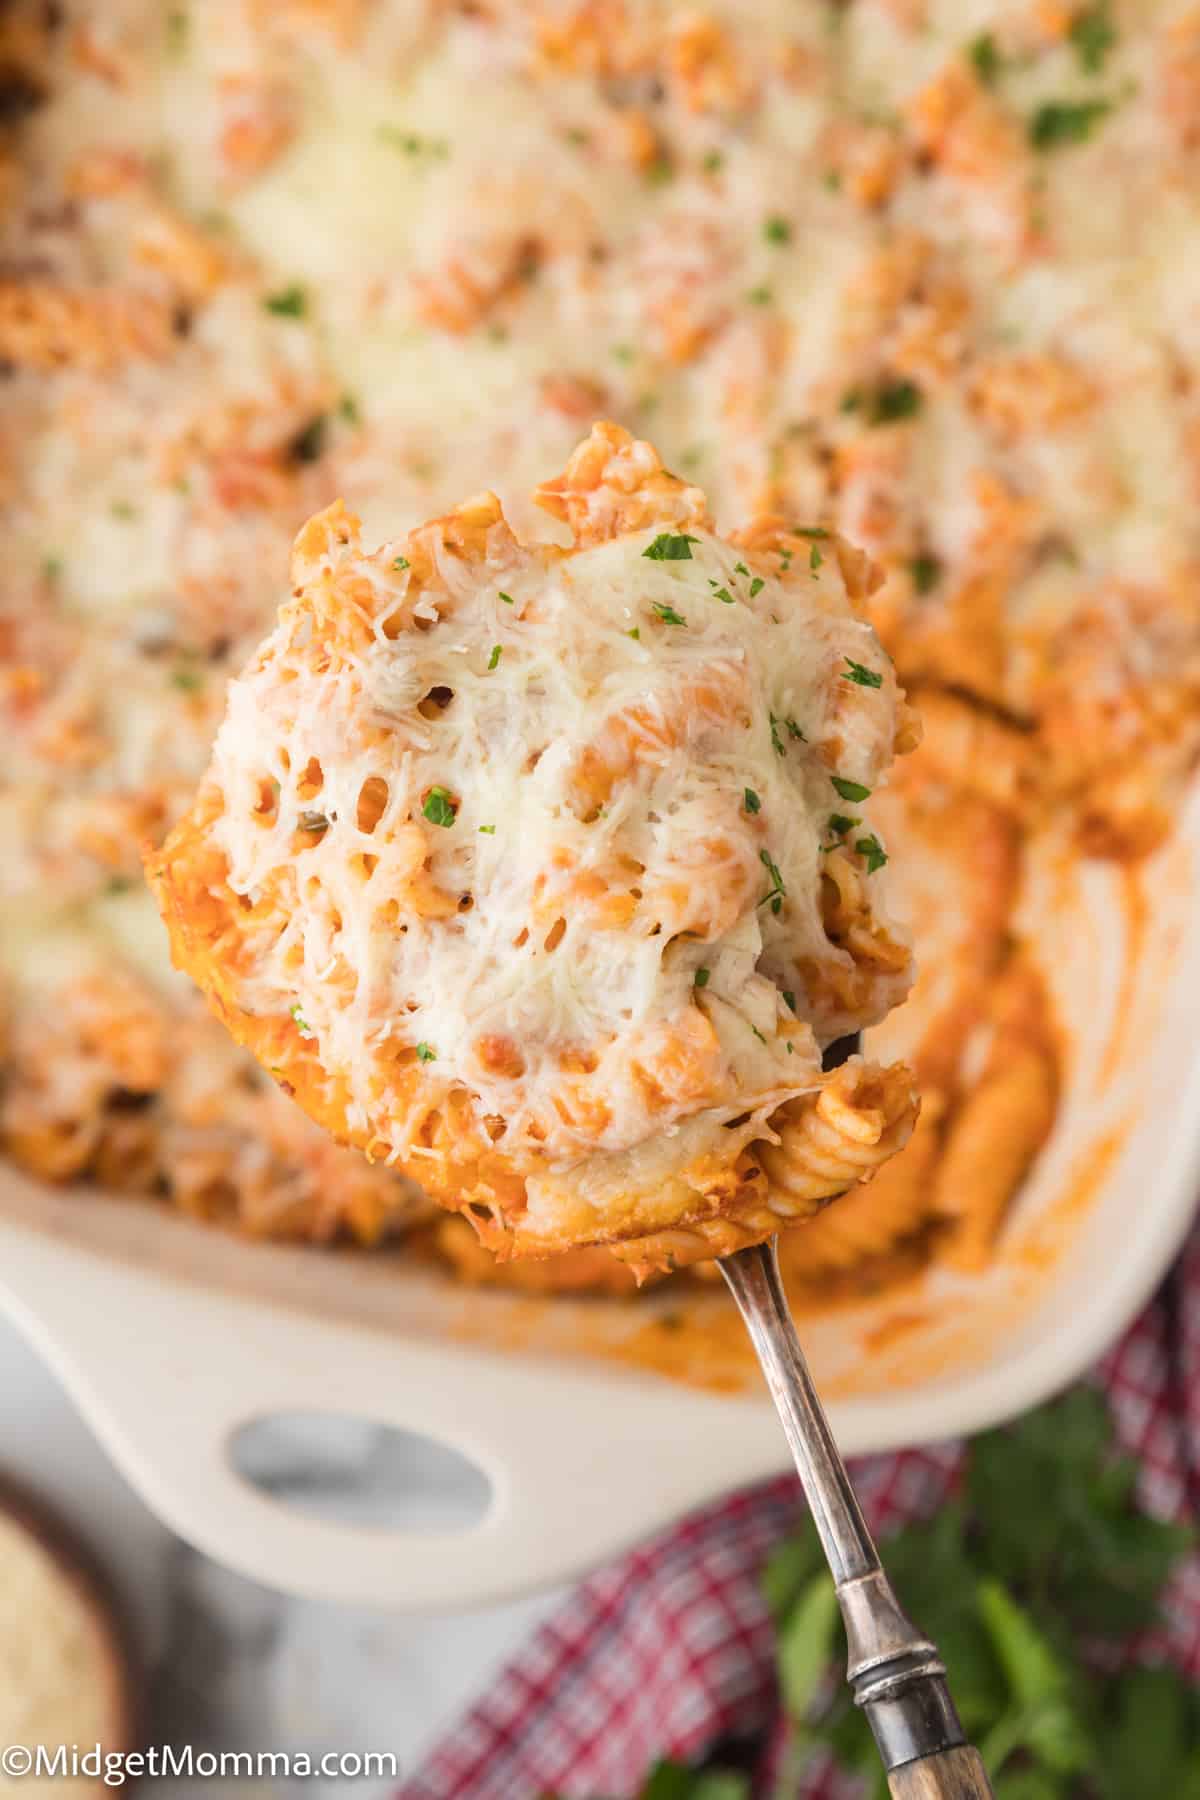 Spoon serving a portion of baked cheesy pasta casserole, with melted cheese on top.